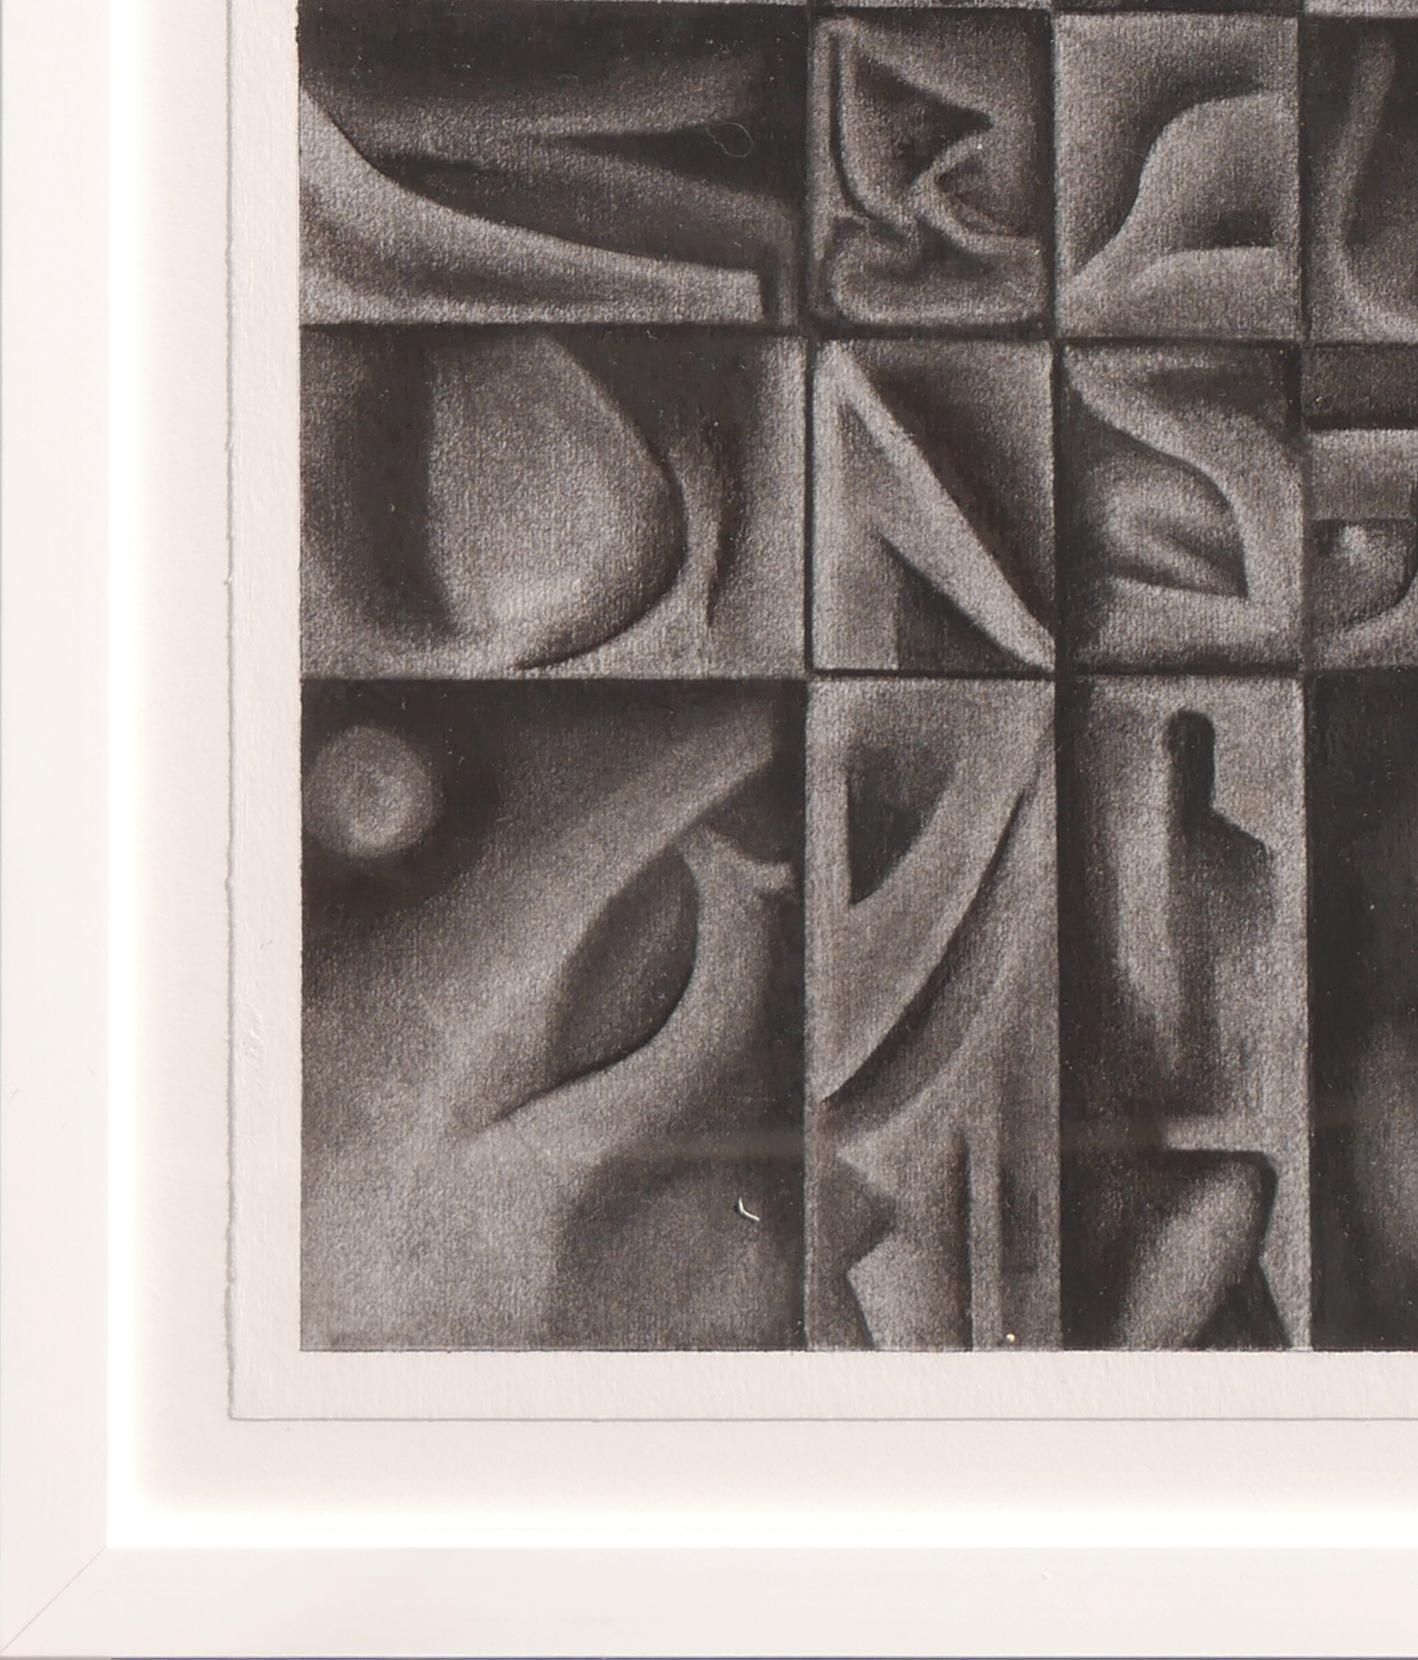 Contemporary black and white geometric charcoal drawing by artist James McCahon. This drawing features dark and light shades of rectangular shapes.
Signed and dated on the bottom right corner. Currently hung in a simple white frame. 

Dimensions